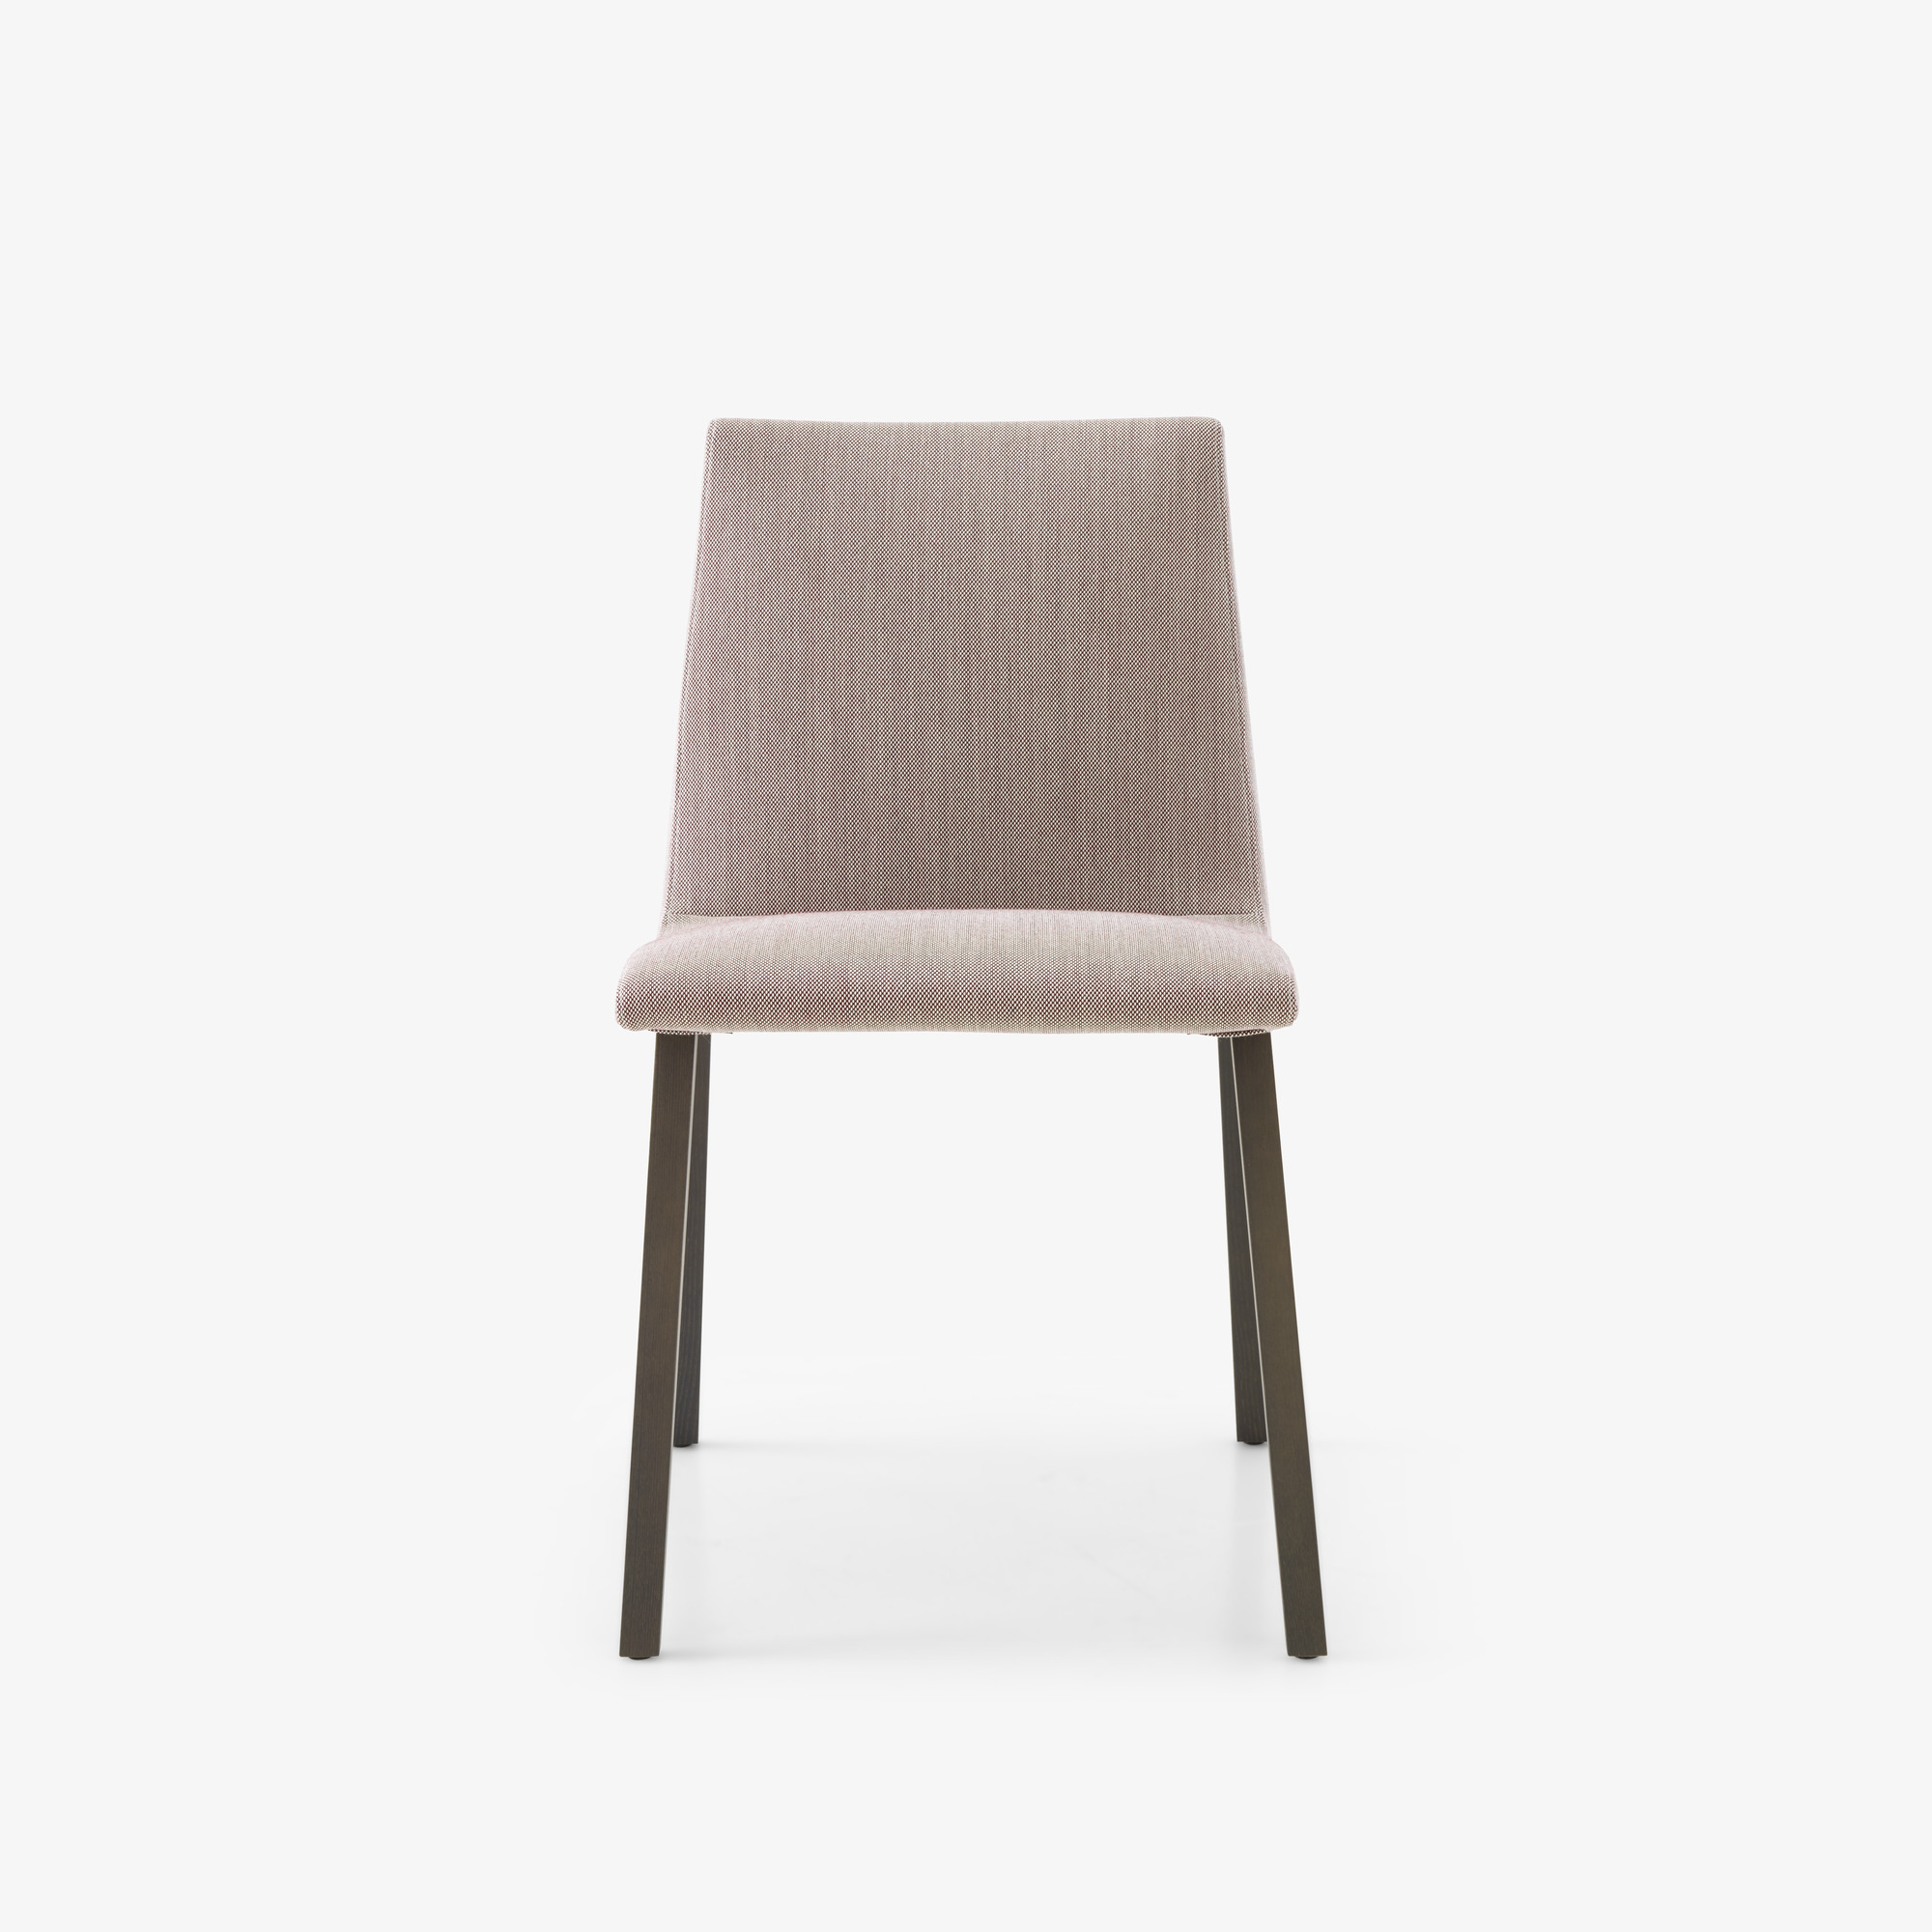 Image Dining chair wooden base 7